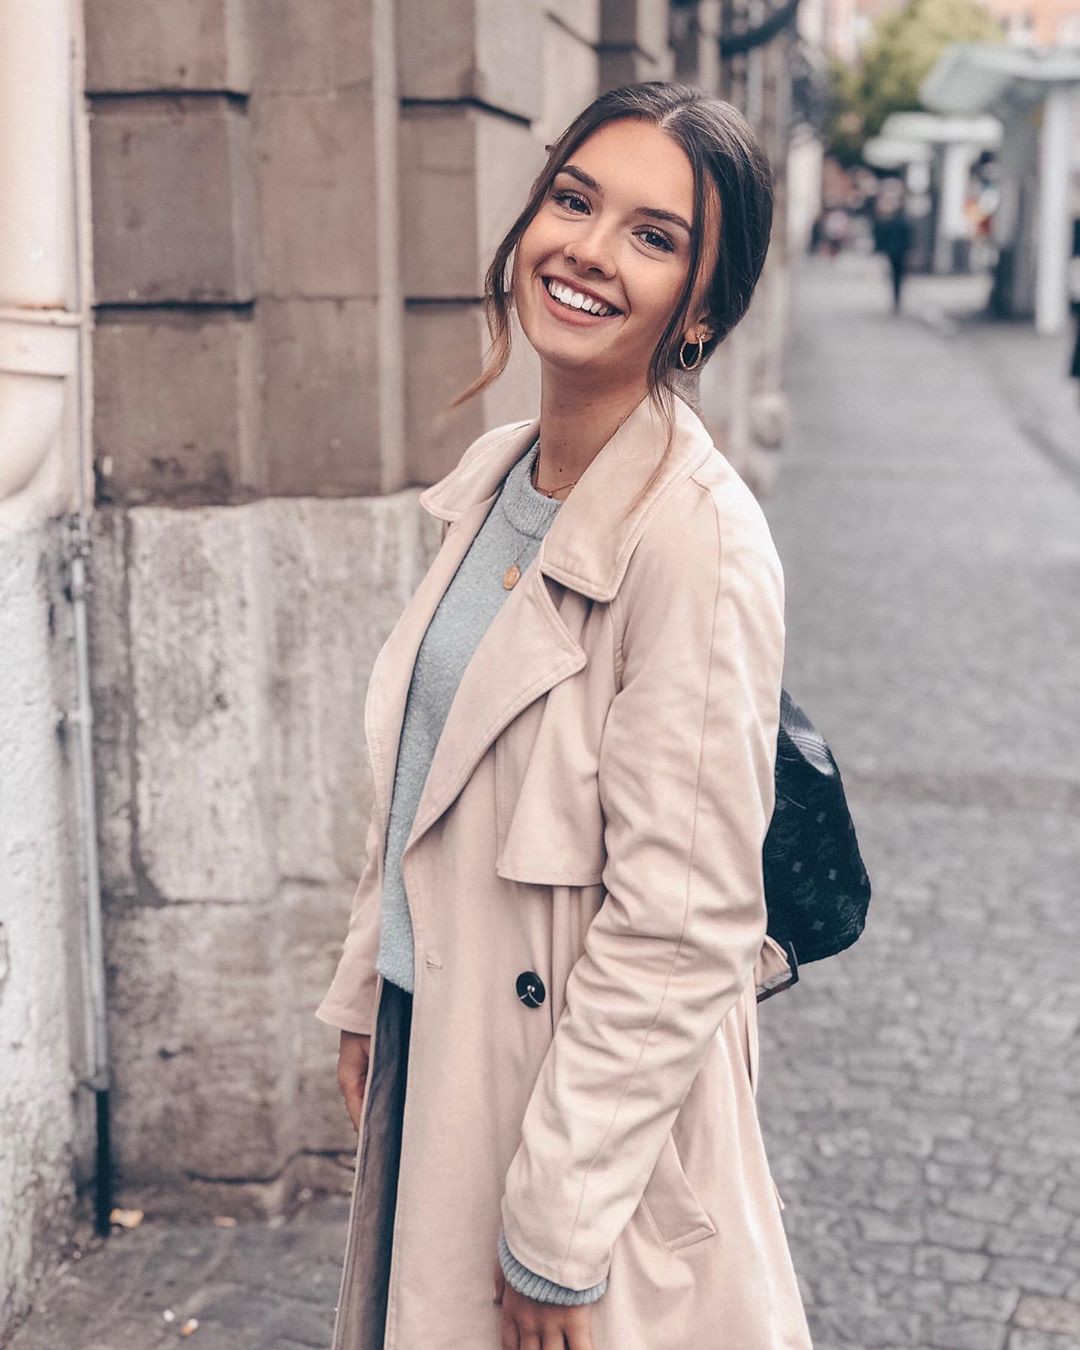 Amelie Weissenberger Trench coat: Trench coat,  Beautiful Girls,  Amelie Weissenberger  